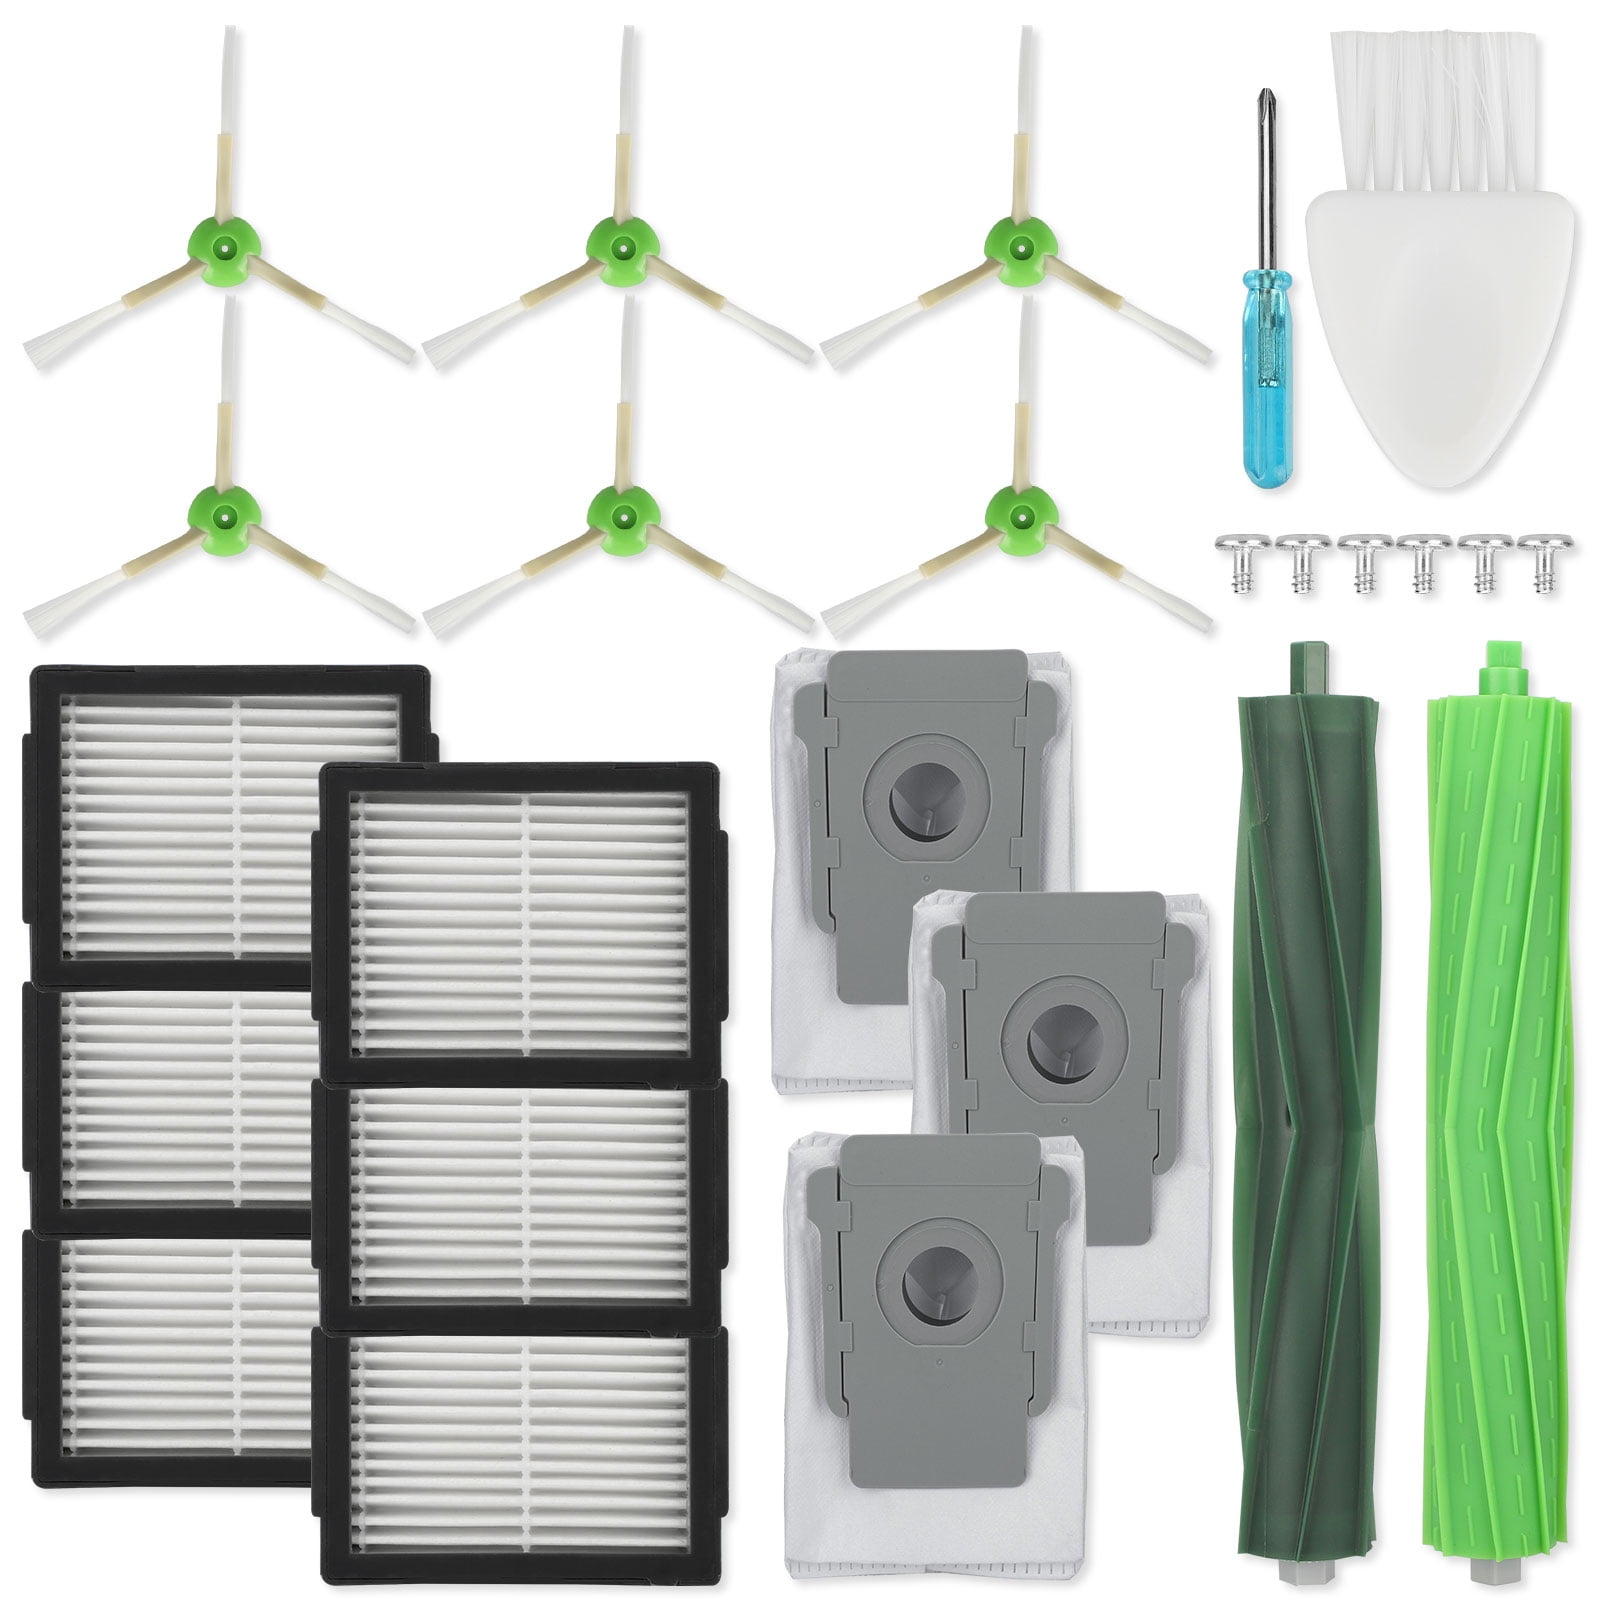 Includes 3 Filters i7 3 Spinners EFP Replenishment Kit for Roomba E5 Replacement Vacuum Filter 2 Rollers 3 Bags E6 i7 Plus Robotic Vacuum i7+ Replaces Part Number 4639168